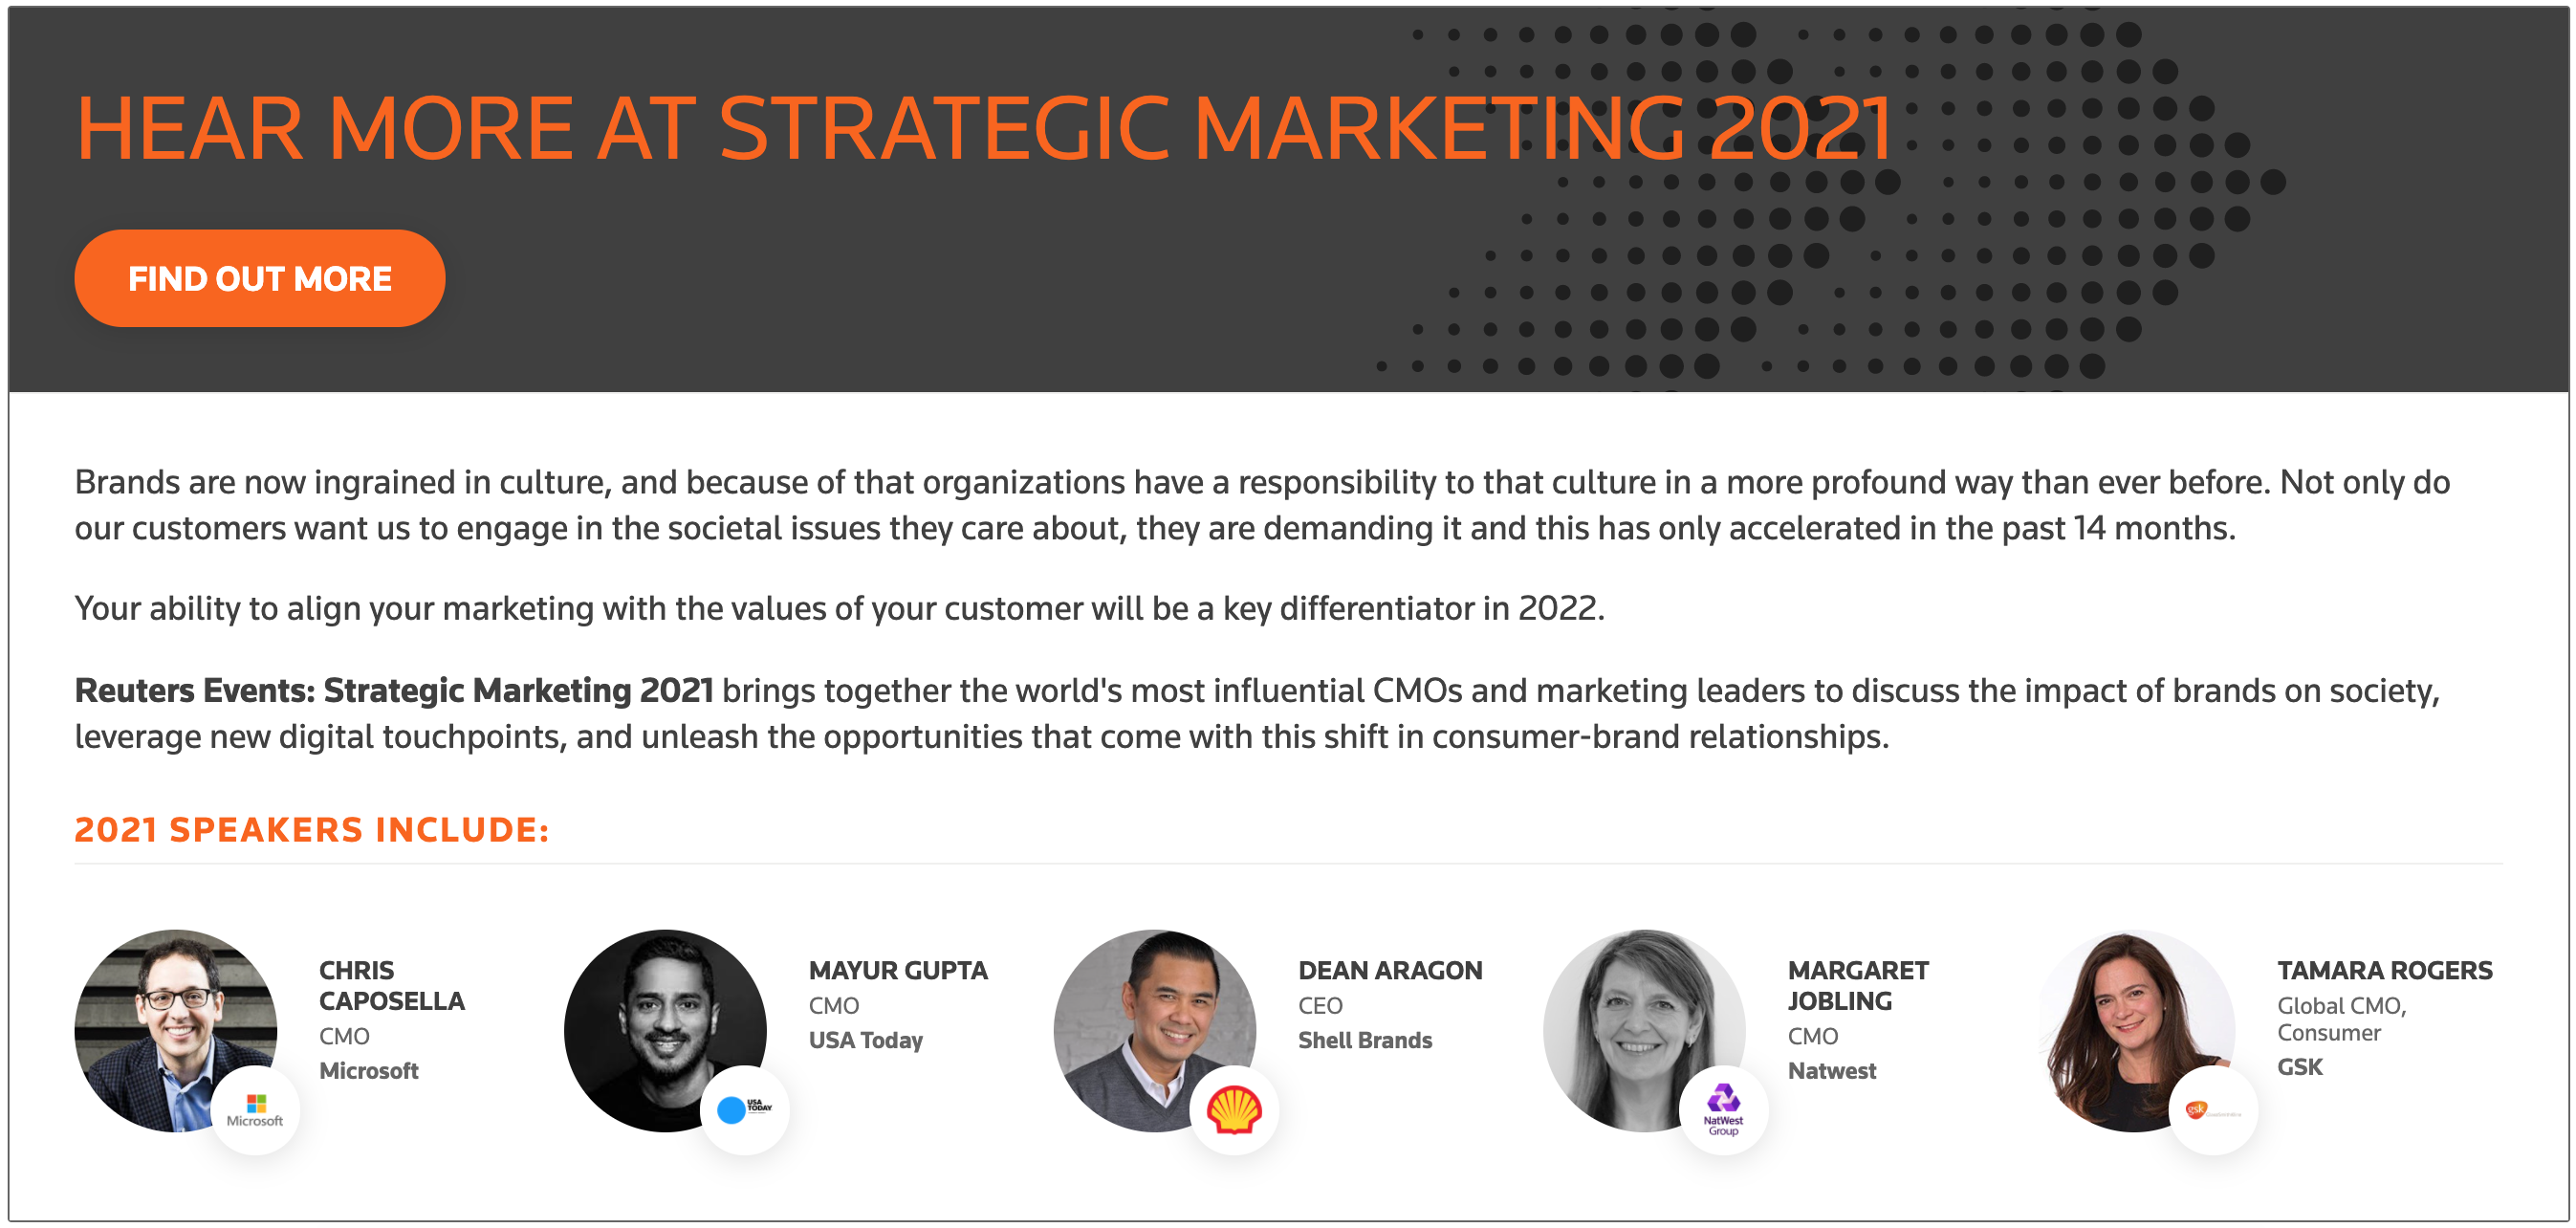 HEAR MORE AT STRATEGIC MARKETING 2021
Brands are now ingrained in culture, and because of that organizations have a responsibility to that culture in a more profound way than ever before. Not only do our customers want us to engage in the societal issues they care about, they are demanding it and this has only accelerated in the past 14 months.

Your ability to align your marketing with the values of your customer will be a key differentiator in 2022.

Reuters Events: Strategic Marketing 2021 brings together the world's most influential CMOs and marketing leaders to discuss the impact of brands on society, leverage new digital touchpoints, and unleash the opportunities that come with this shift in consumer-brand relationships.

2021 SPEAKERS INCLUDE:


CHRIS CAPOSELLA
CMO
Microsoft

MAYUR GUPTA
CMO
USA Today

DEAN ARAGON
CEO
Shell Brands

MARGARET JOBLING
CMO
Natwest

TAMARA ROGERS
Global CMO, Consumer
GSK